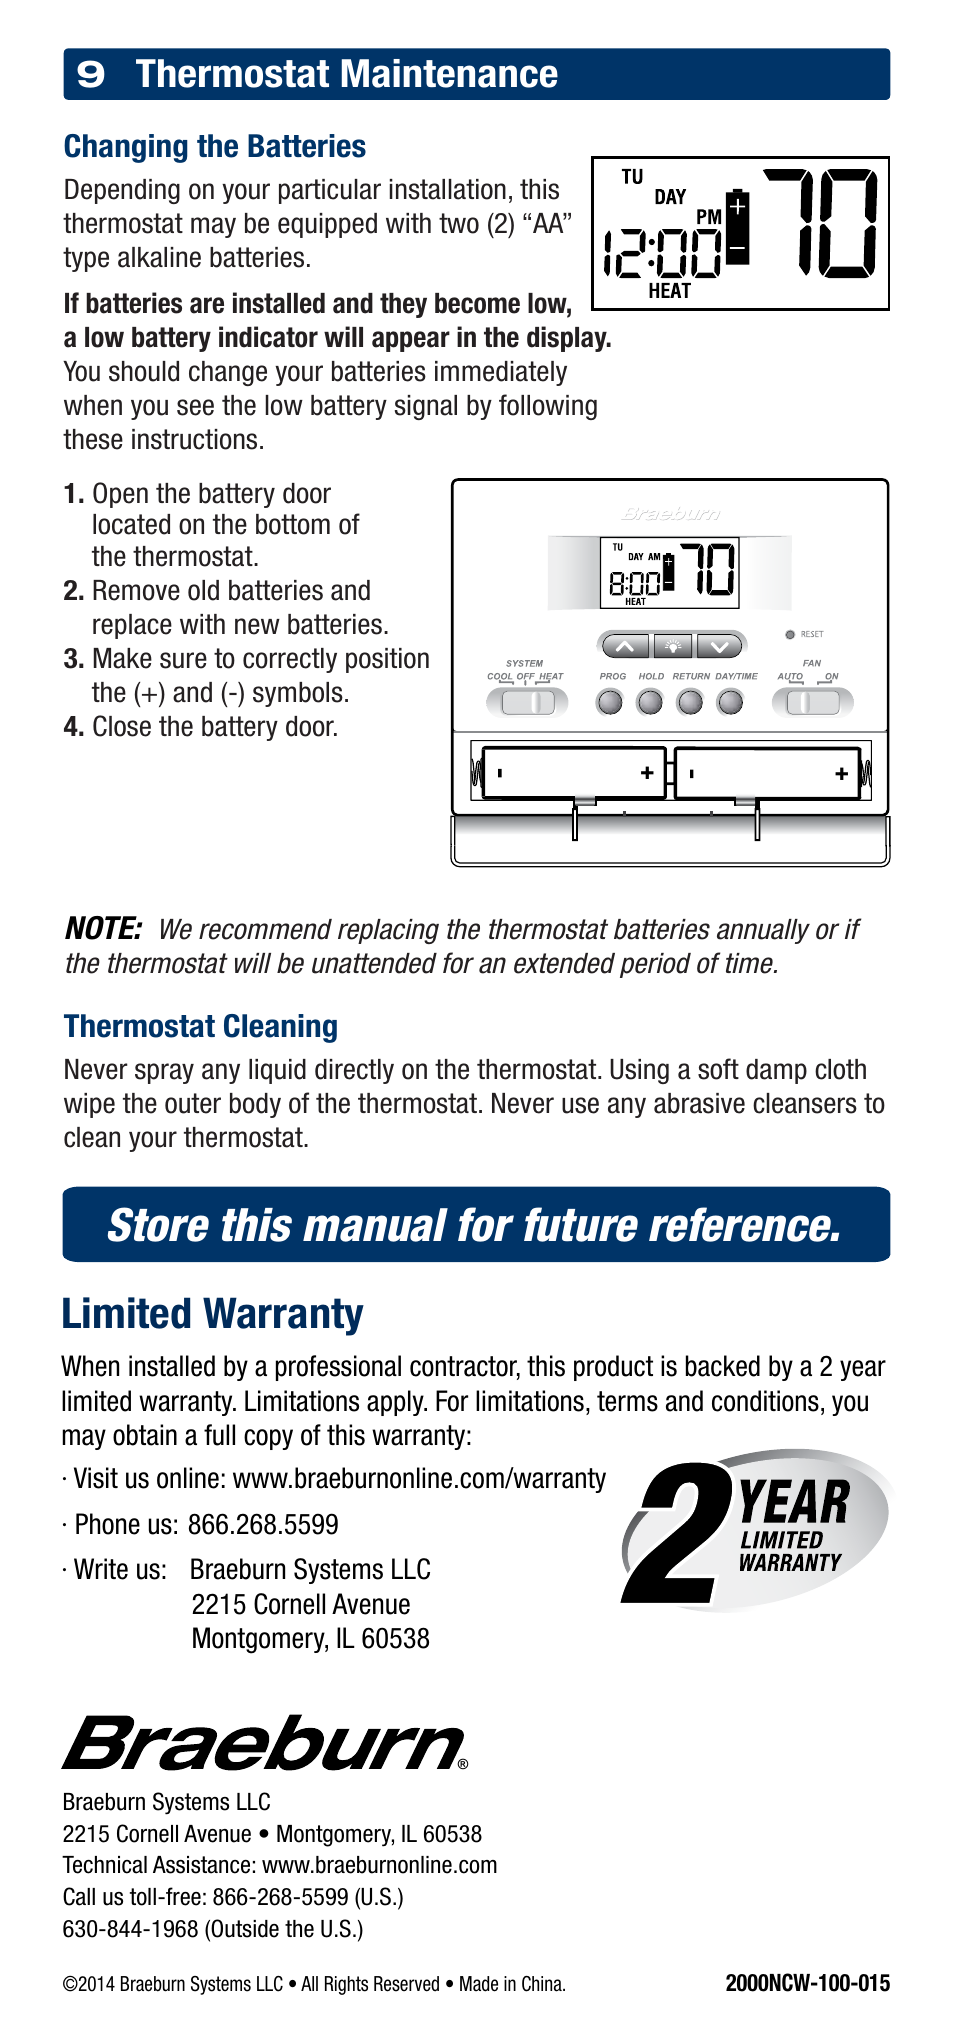 Store this manual for future reference, Limited warranty, Thermostat